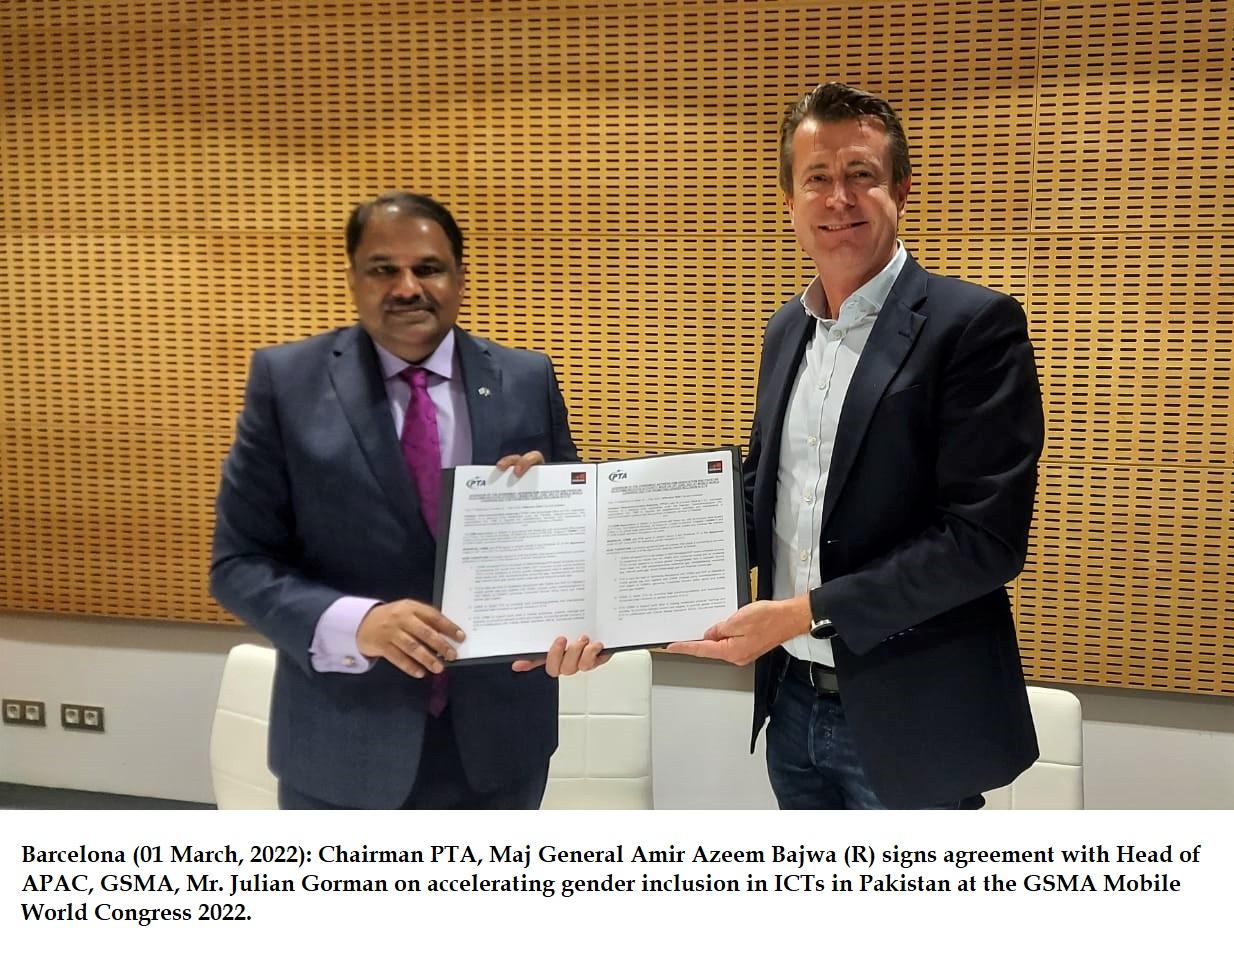 PTA GSMA Sign Agreement to Accelerate Gender Inclusion in ICTs in Pakistan